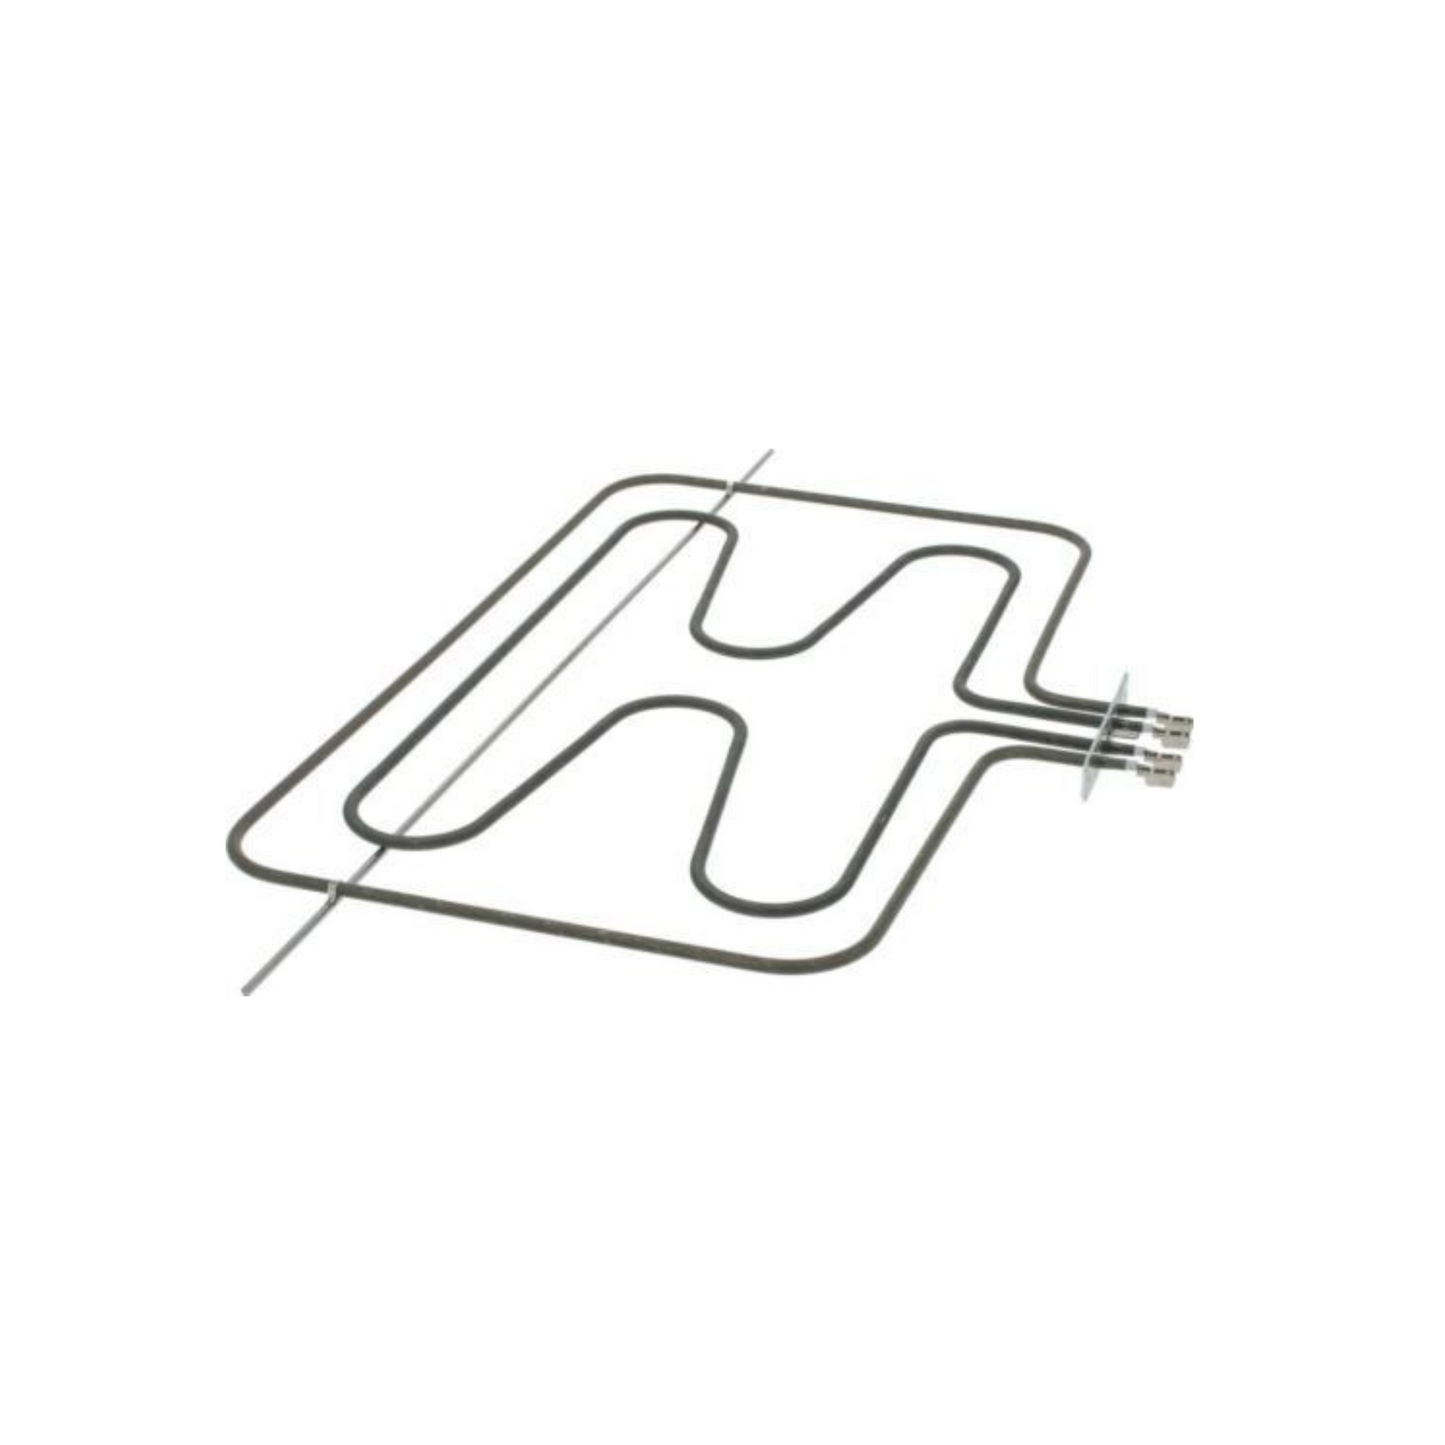 C00141175 Ariston, Cannon, Hotpoint Oven Grill Heating Element 1050W-2000W - ELE2112, 48192592867